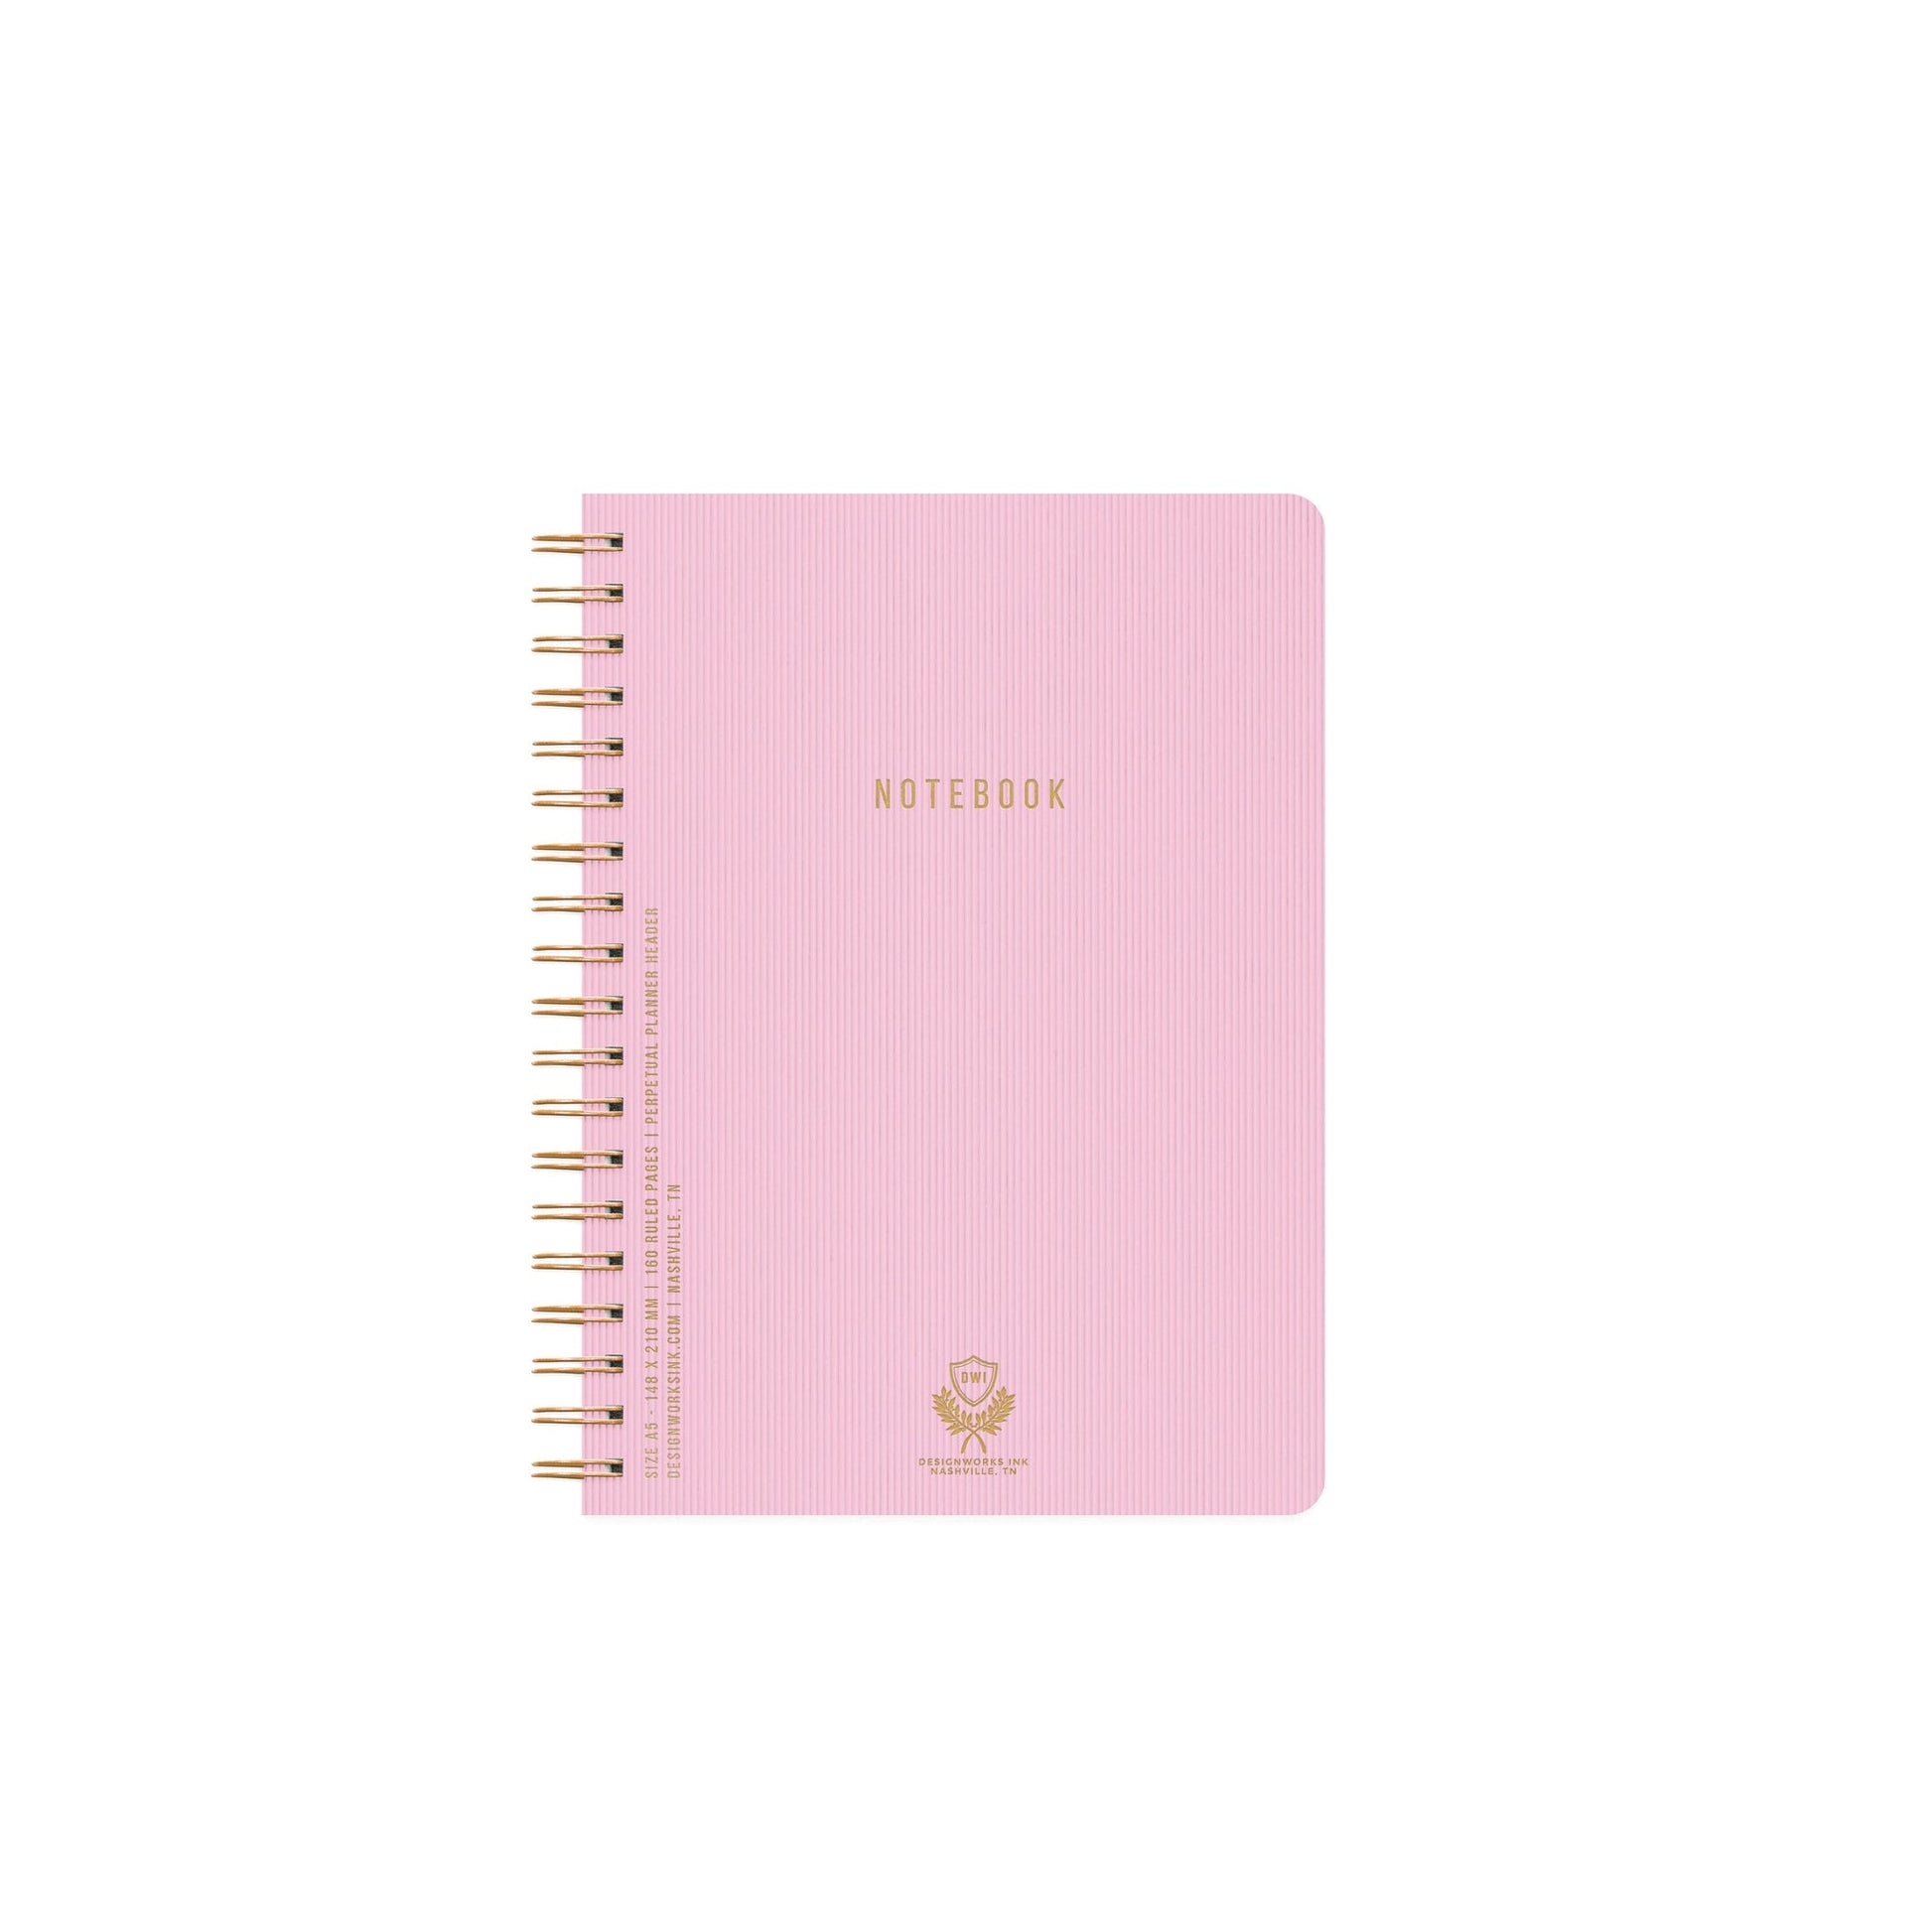 medium sized Textured Paper Twin Wire Notebook with lilac cover embossed with gold text reading Notebook